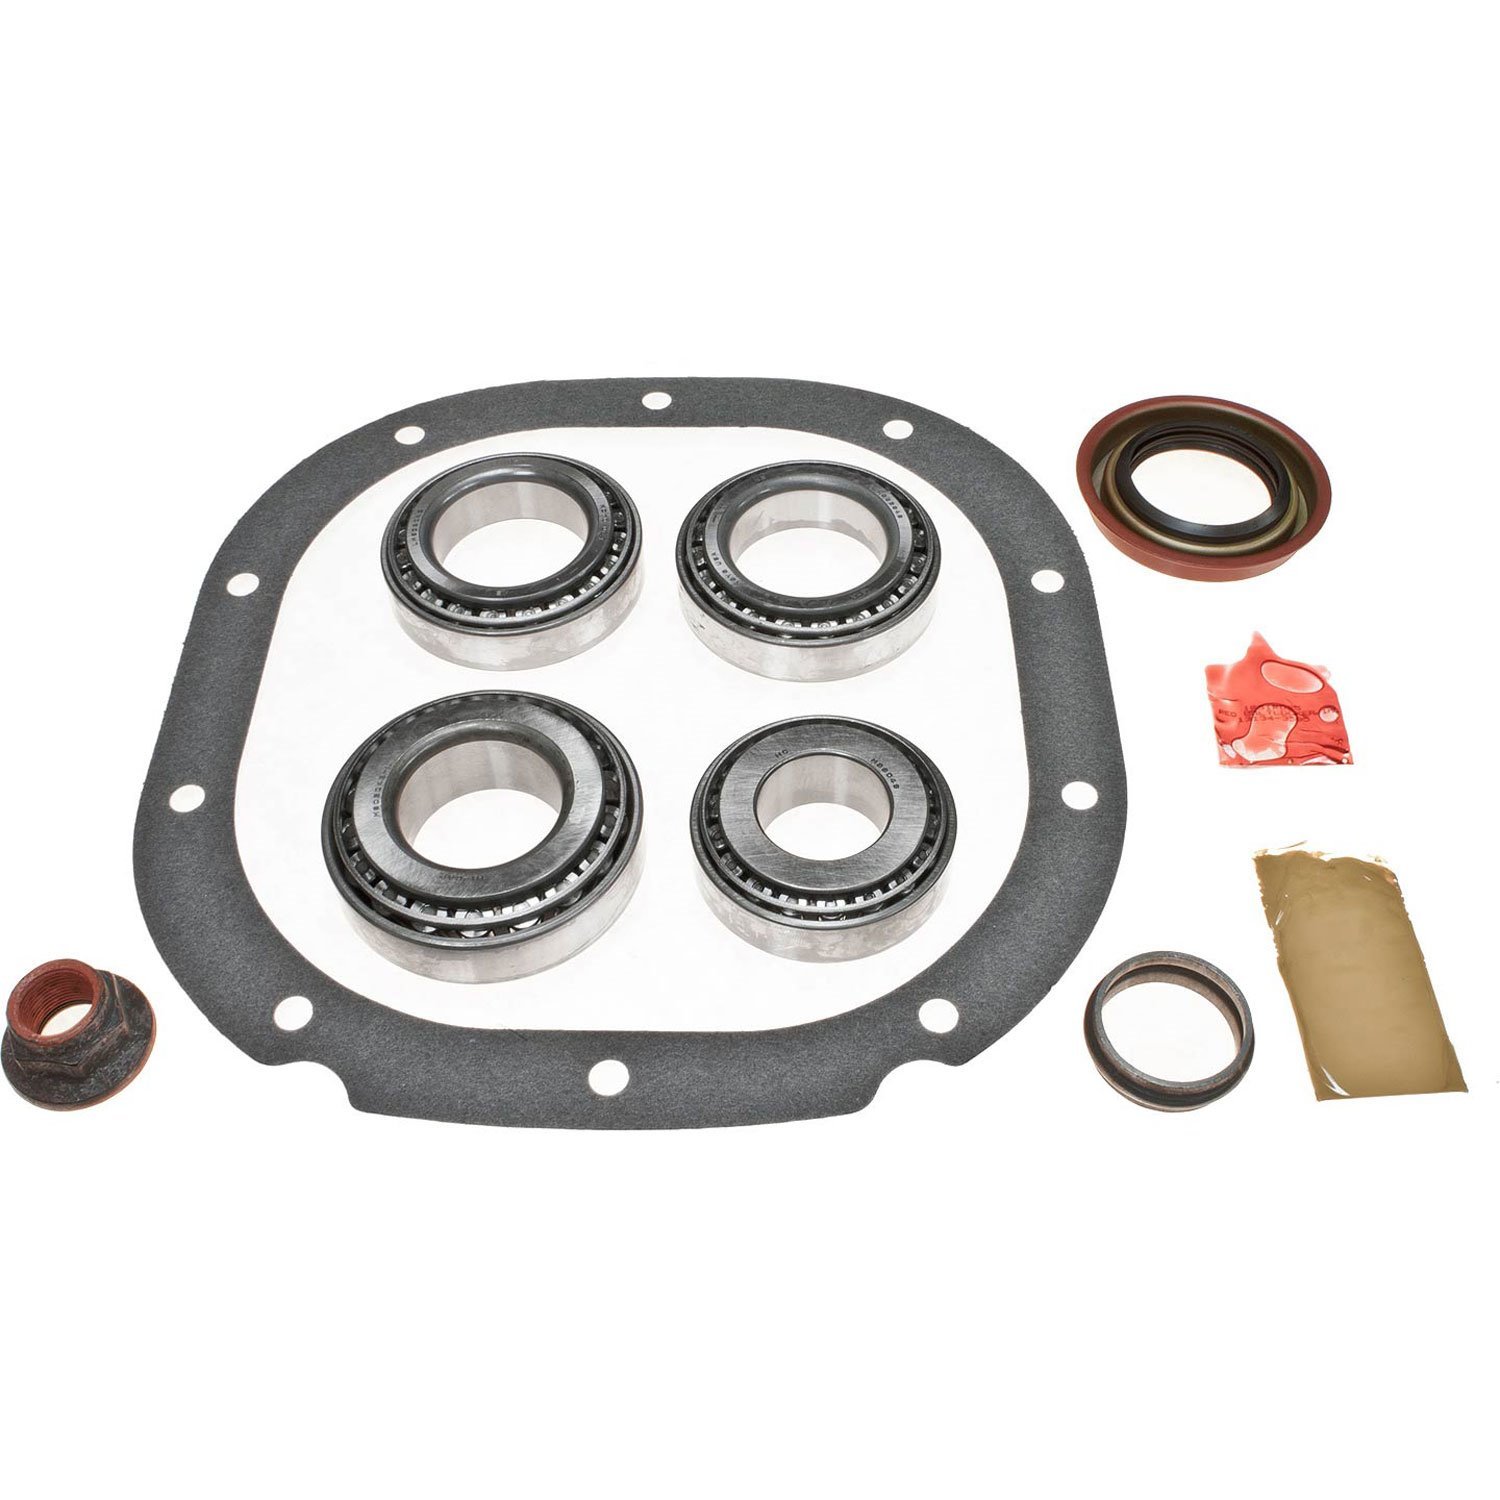 Differential Bearing Kit Ford 8.8 in. 10-bolt - Timken Bearings